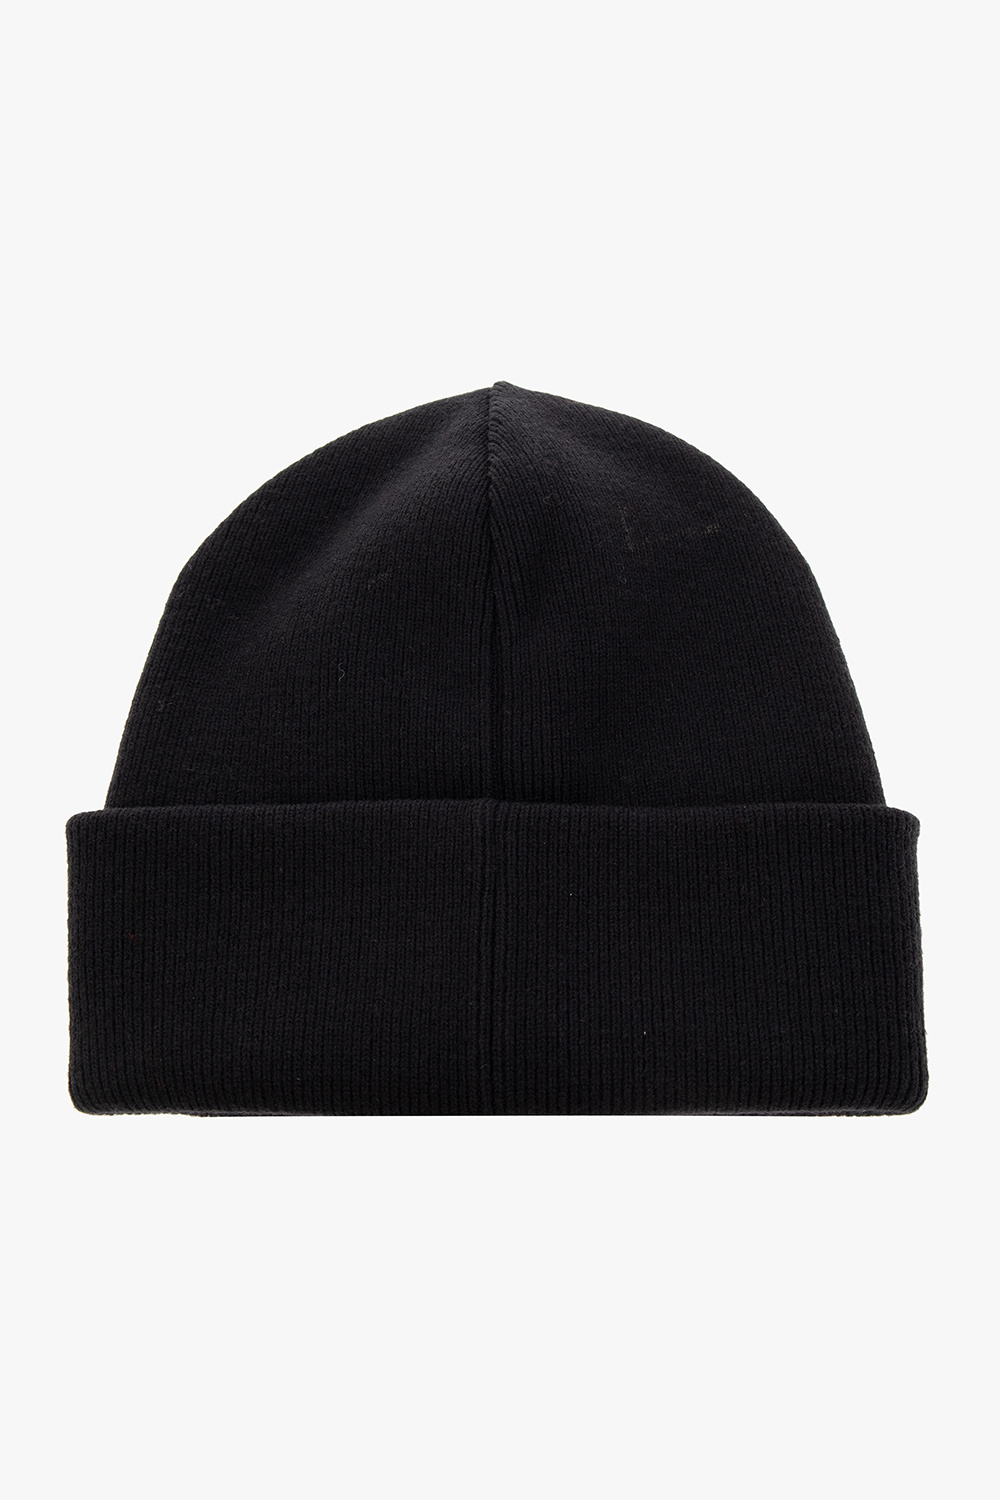 Dsquared2 Wool beanie with logo